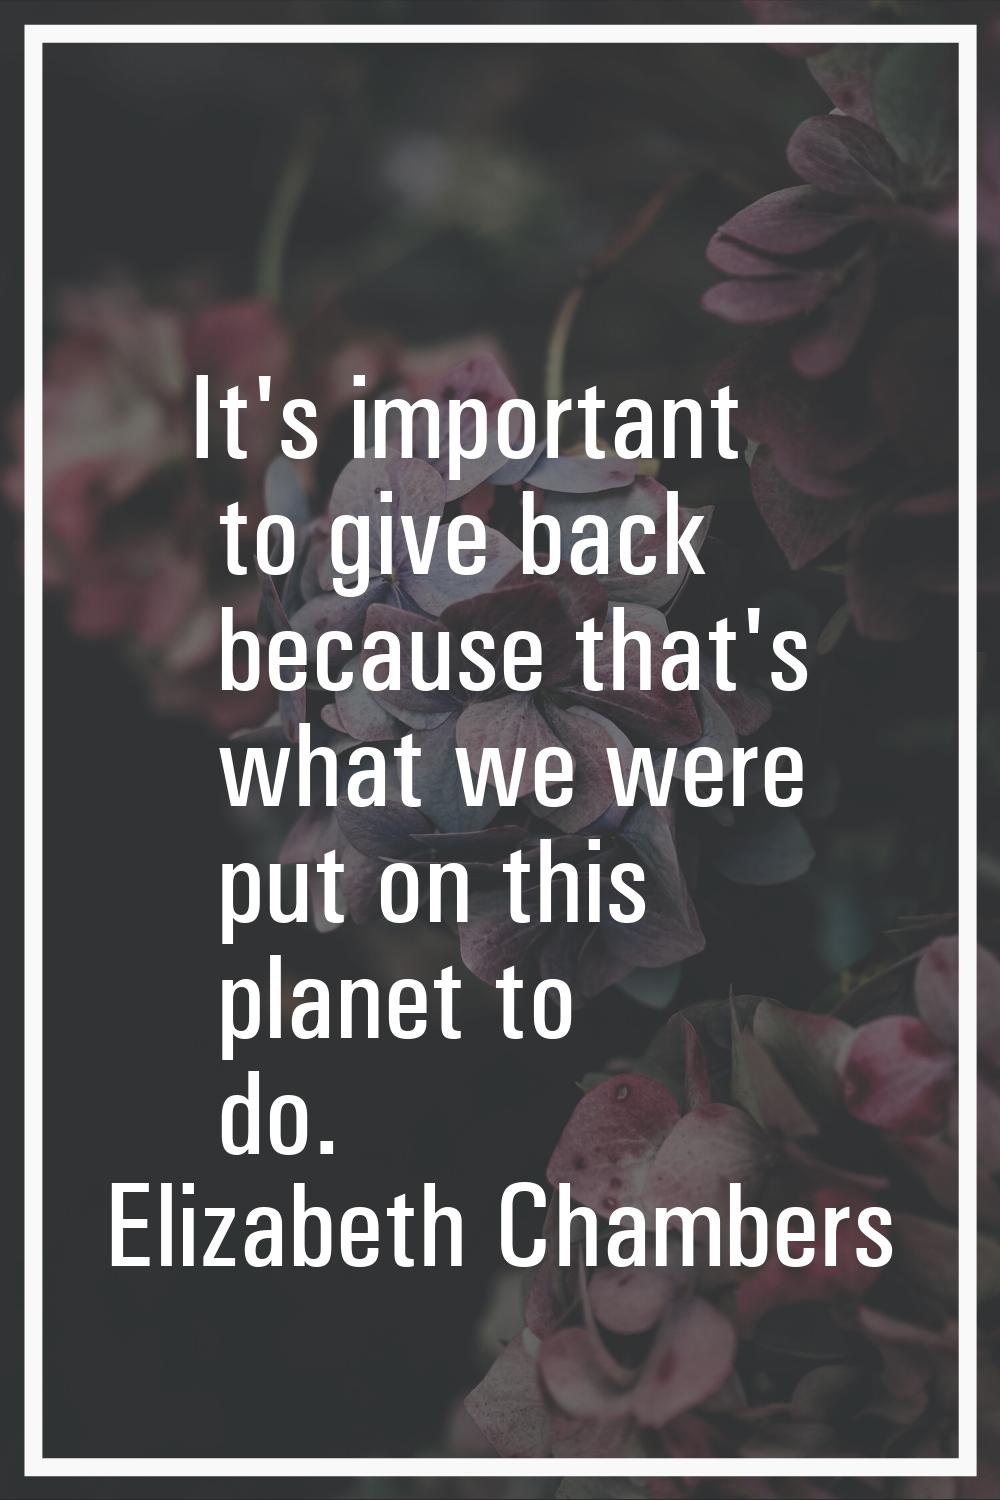 It's important to give back because that's what we were put on this planet to do.